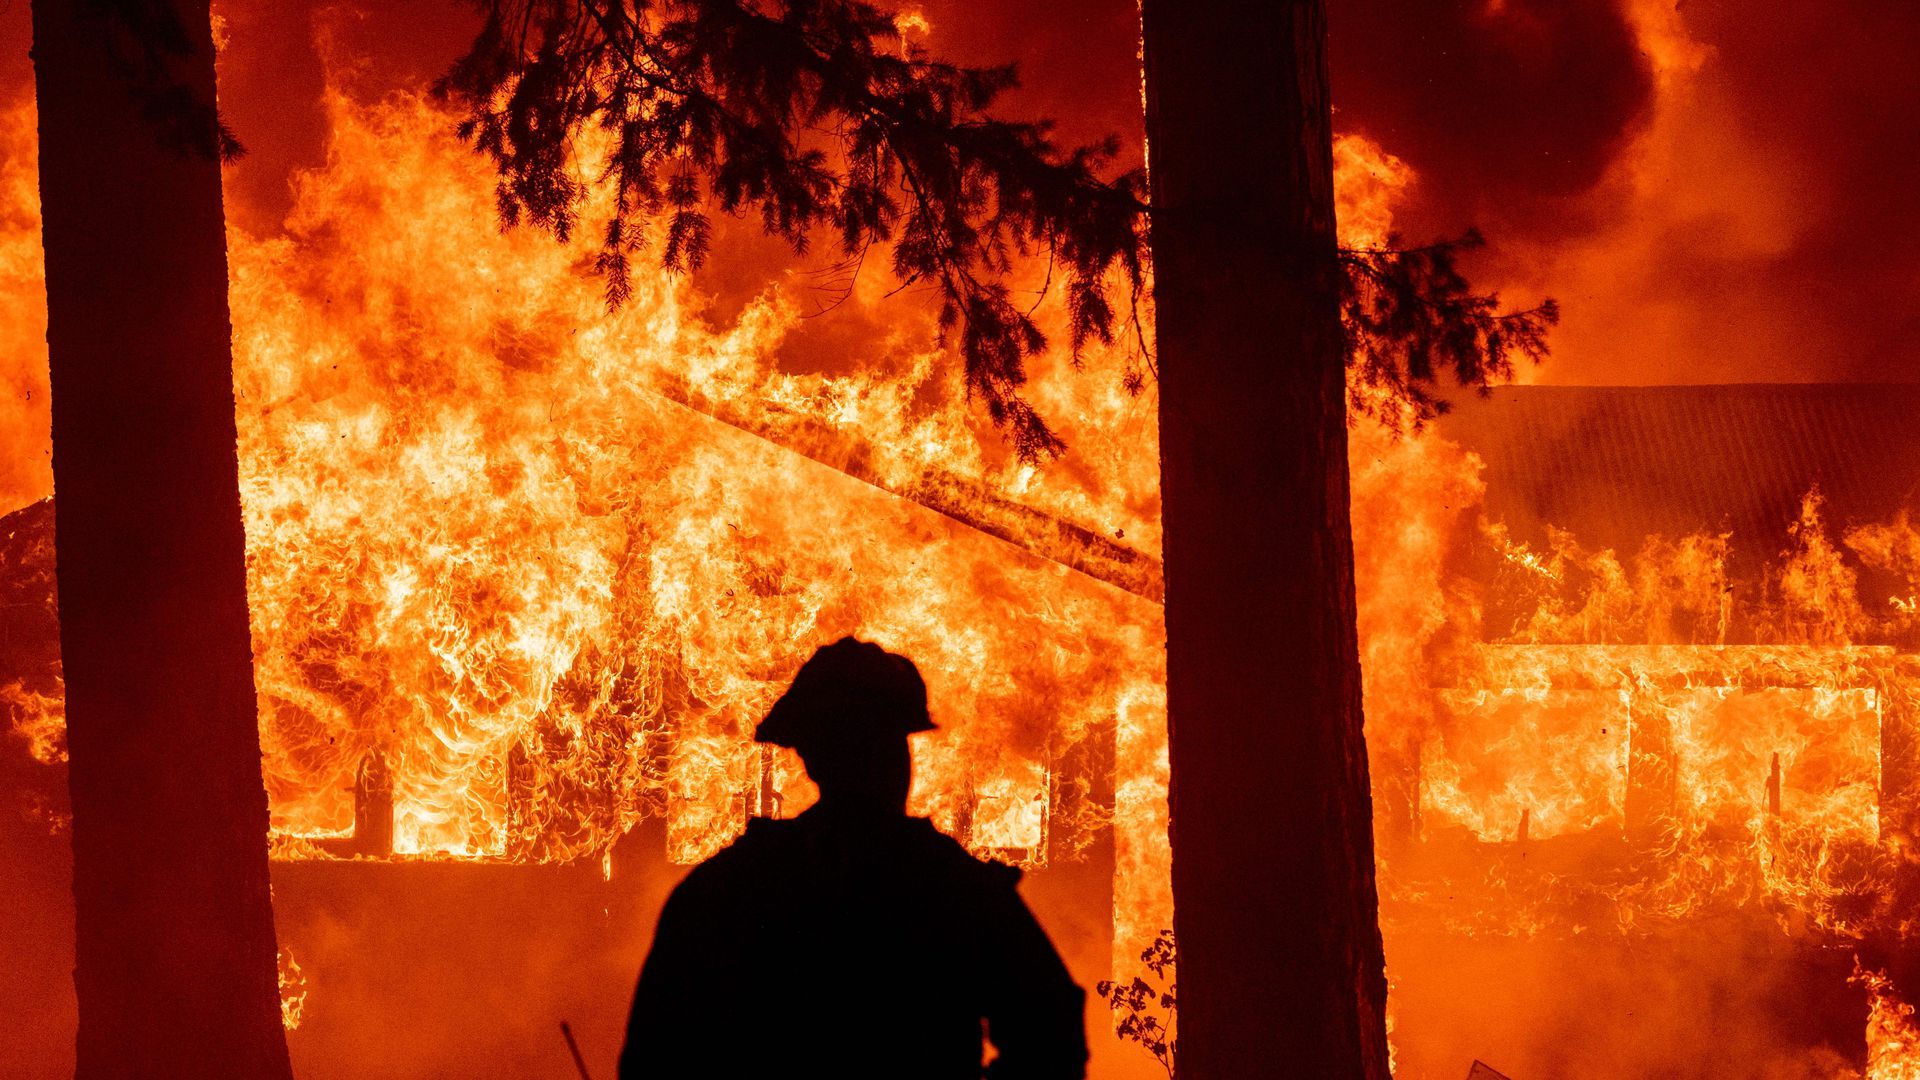 Firefighters on the scene as dozens of homes burn during the Dixie Fire in the Indian Falls neighborhood of unincorporated Plumas County, California, on July 24.